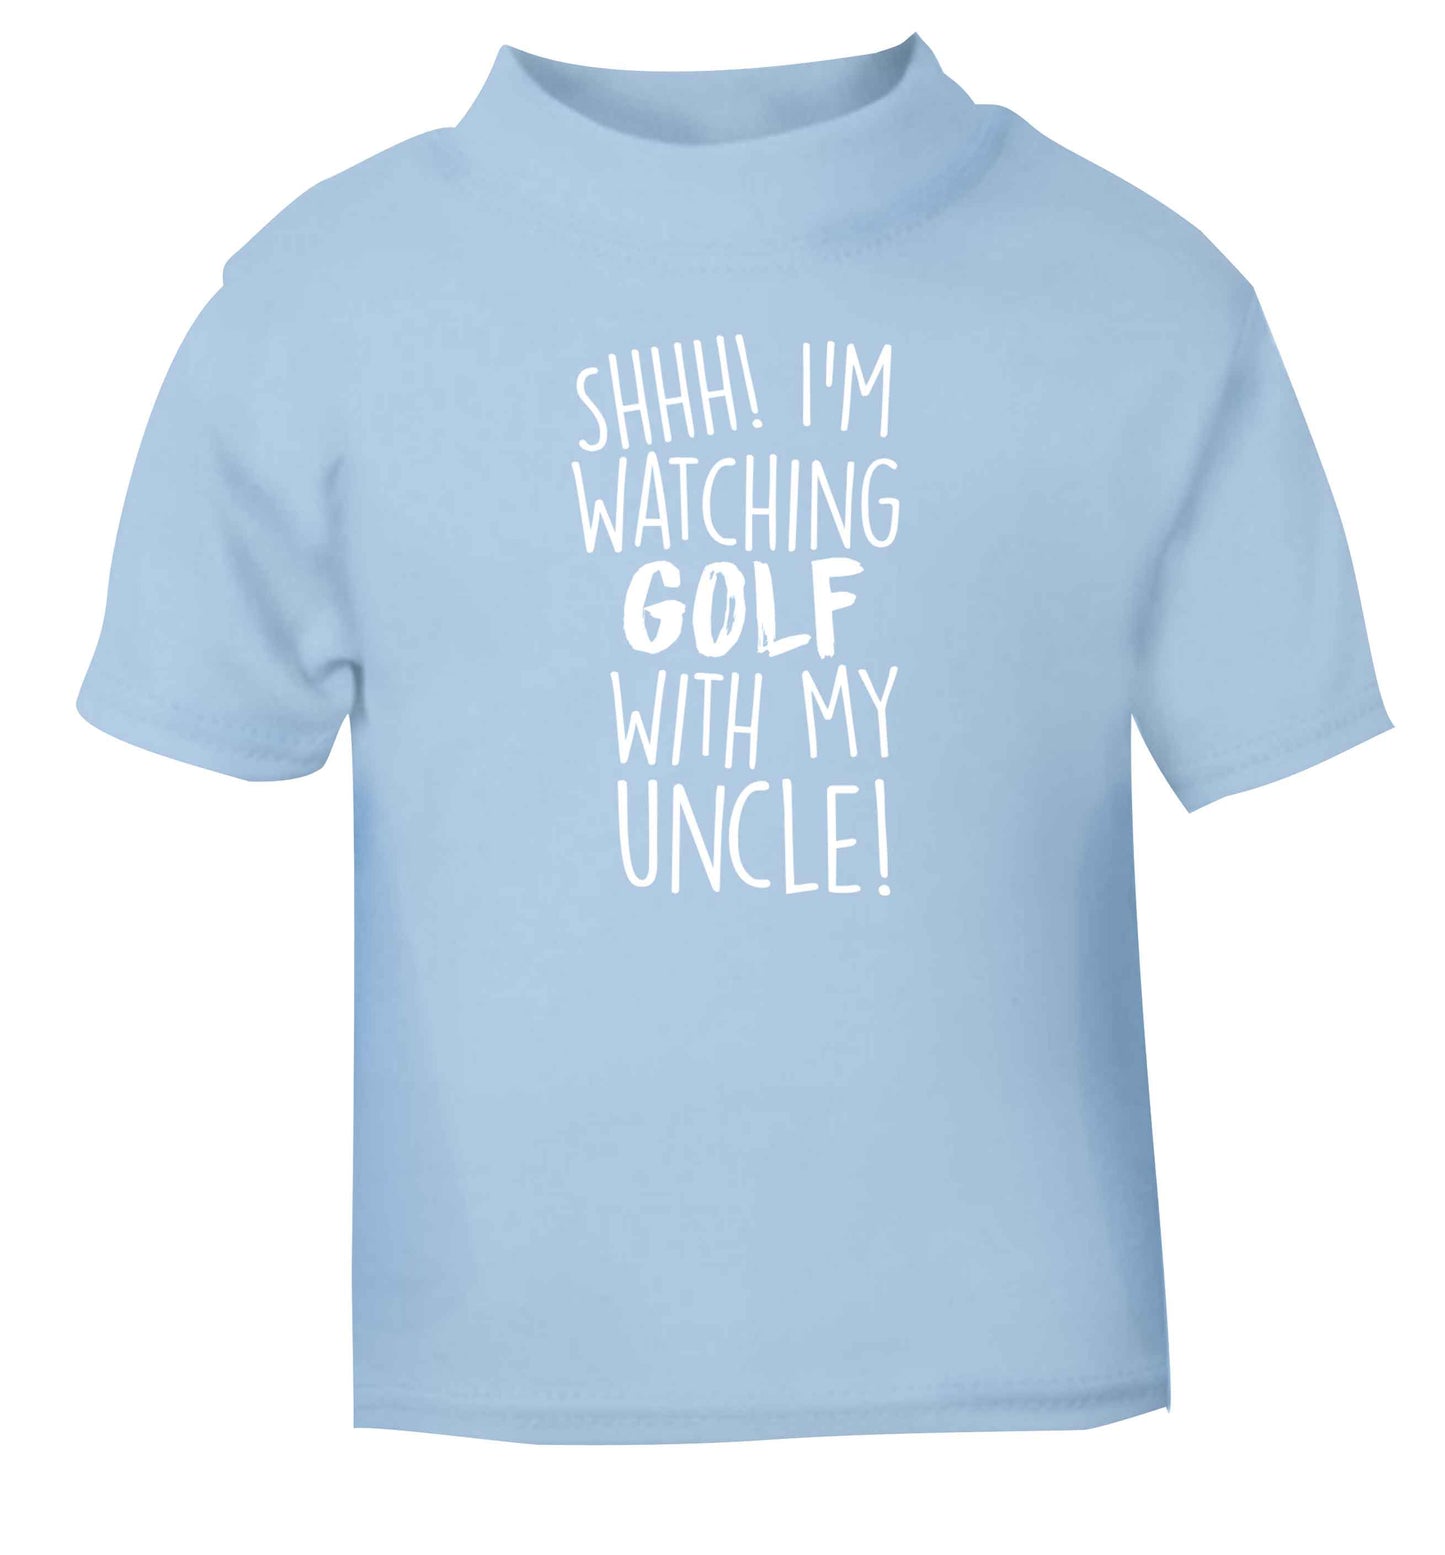 Shh I'm watching golf with my uncle light blue Baby Toddler Tshirt 2 Years